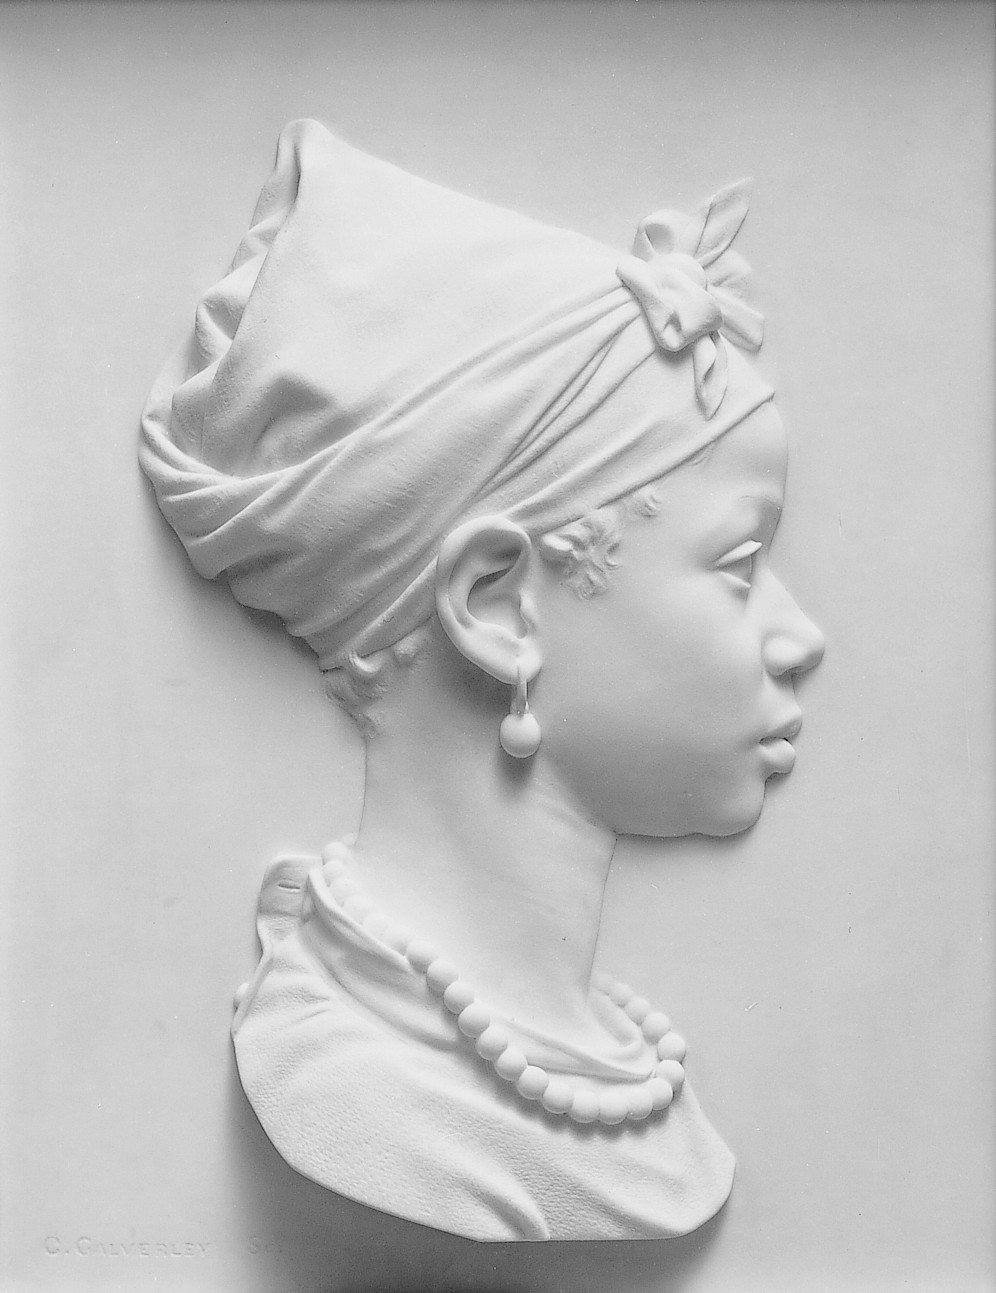 A side profile relief statue image of a young woman.